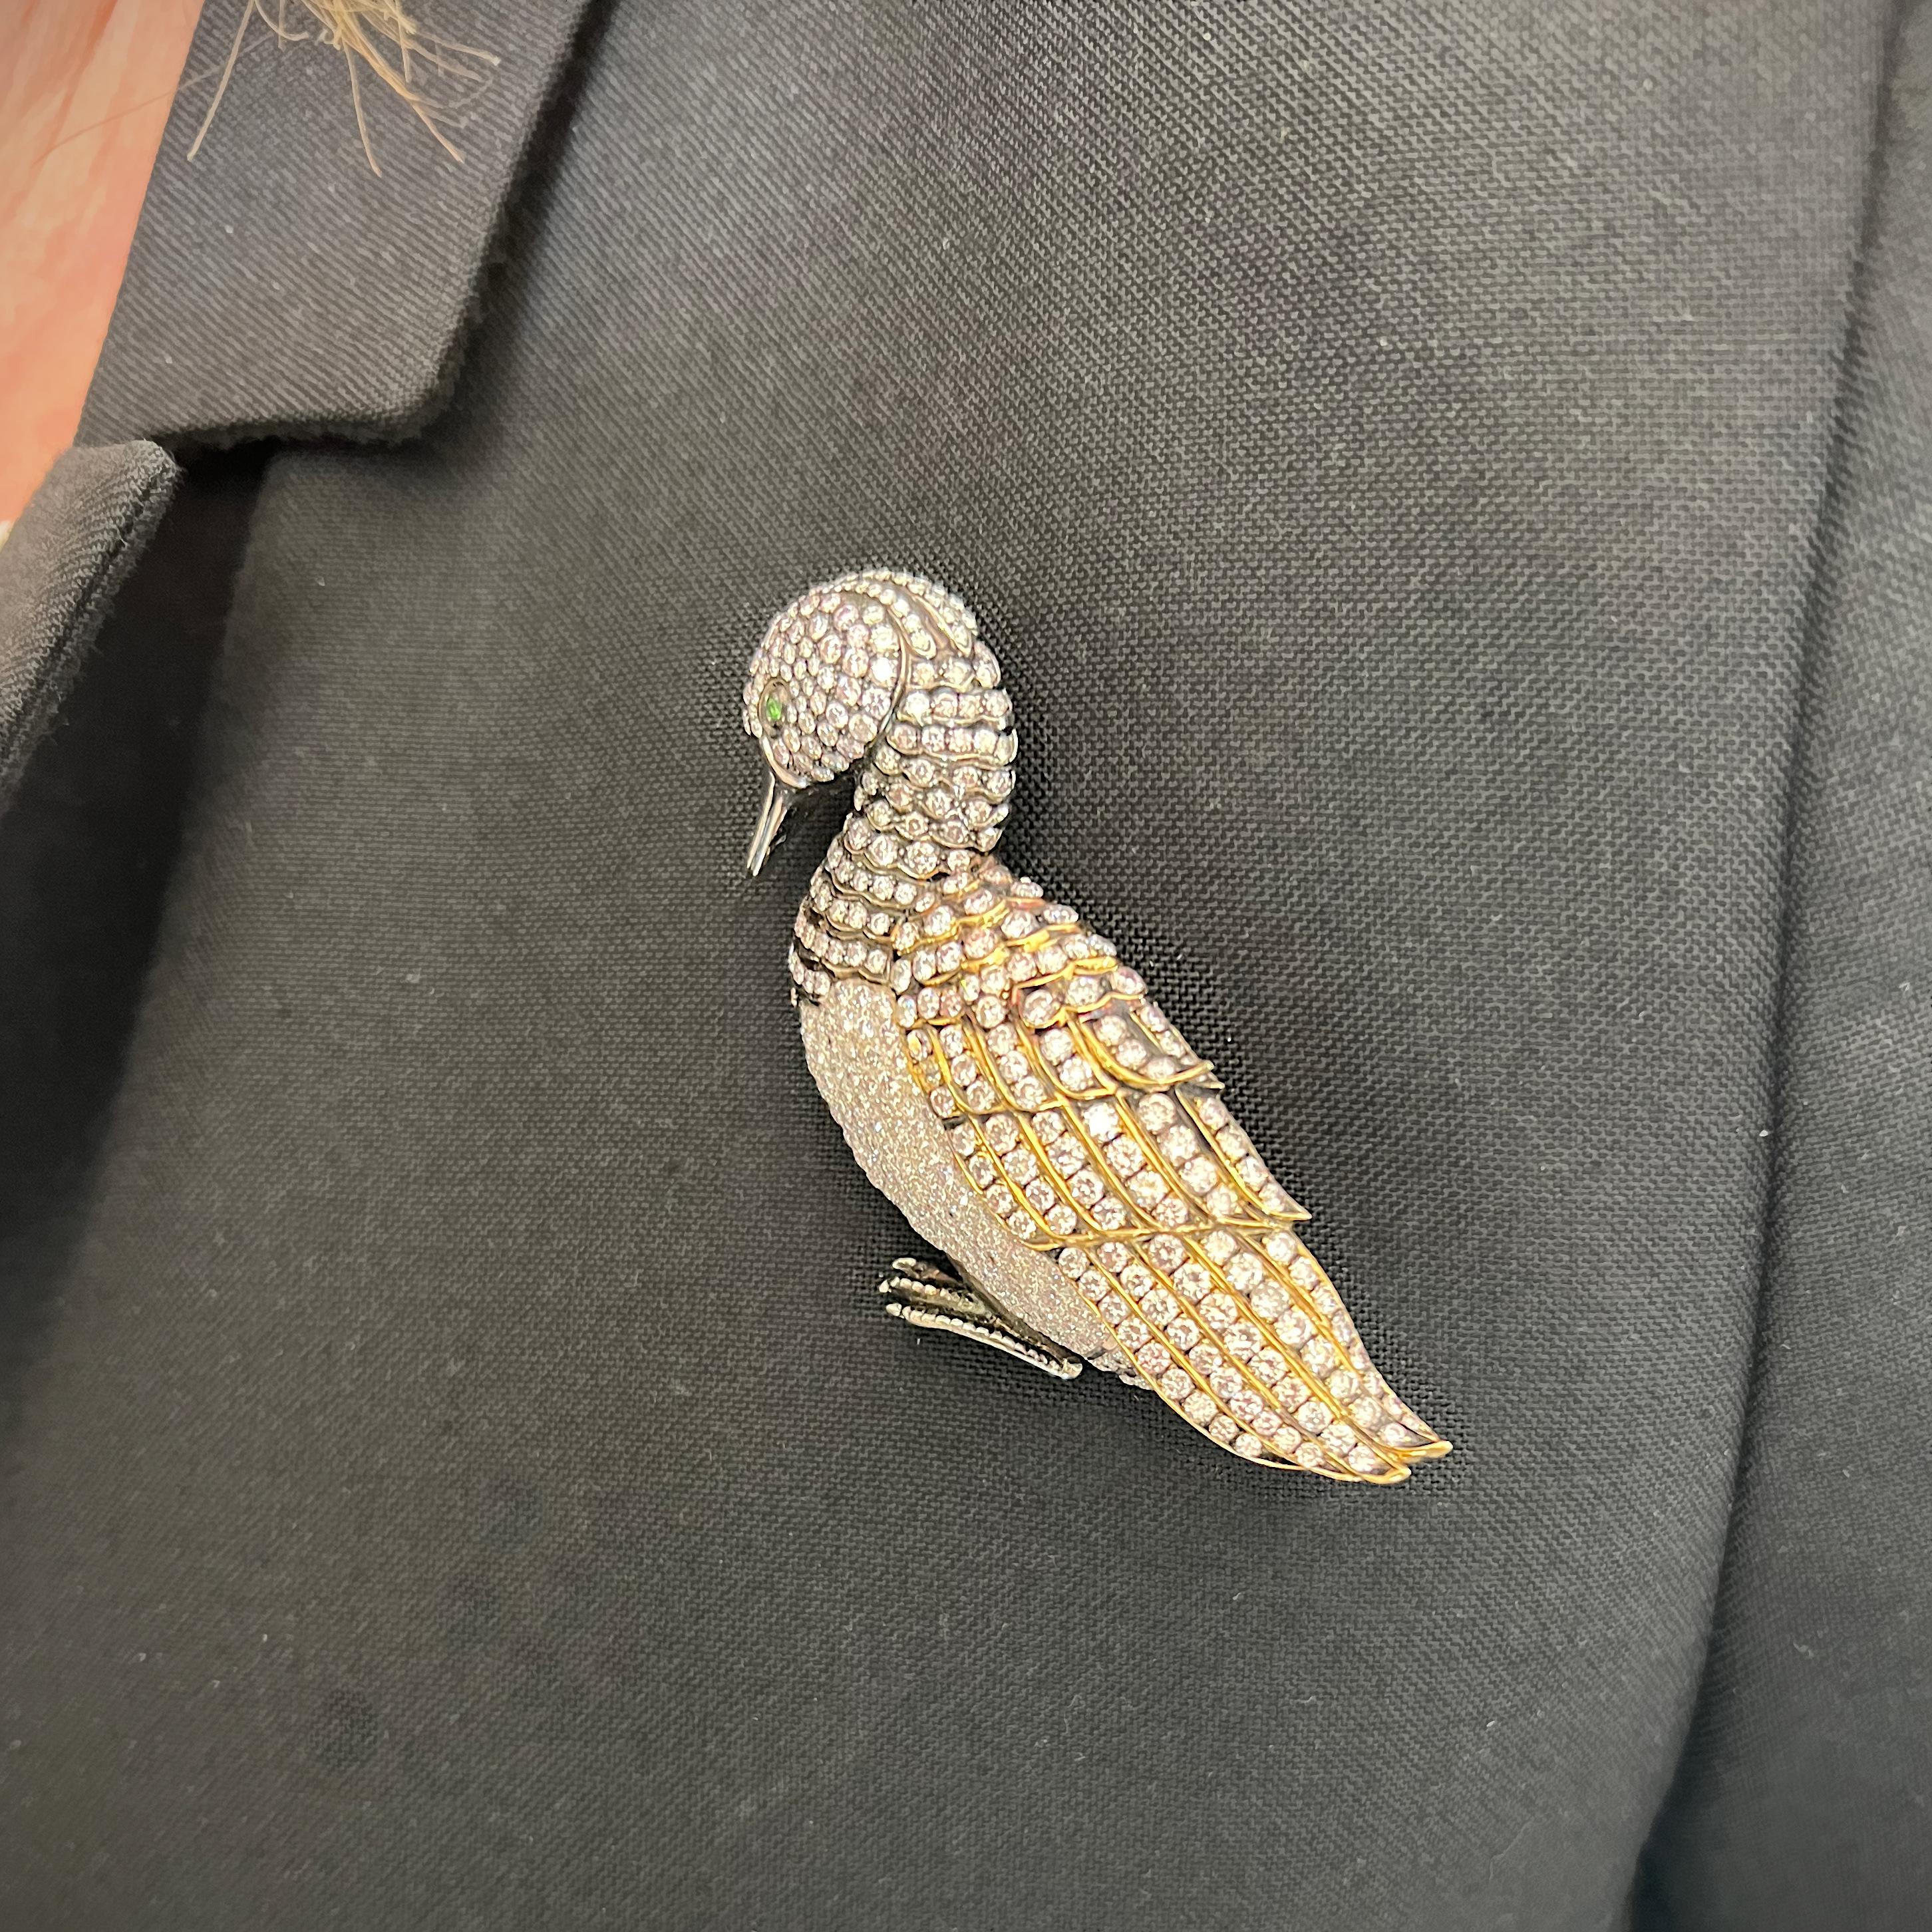 A diamond set duck brooch, with round brilliant-cut diamonds, with pinky-brown tint to represent feathers, pavé set in platinum, with an 18ct yellow gold wing and oxidised metal detail to the head, neck and wing, and green garnet eye. The estimated